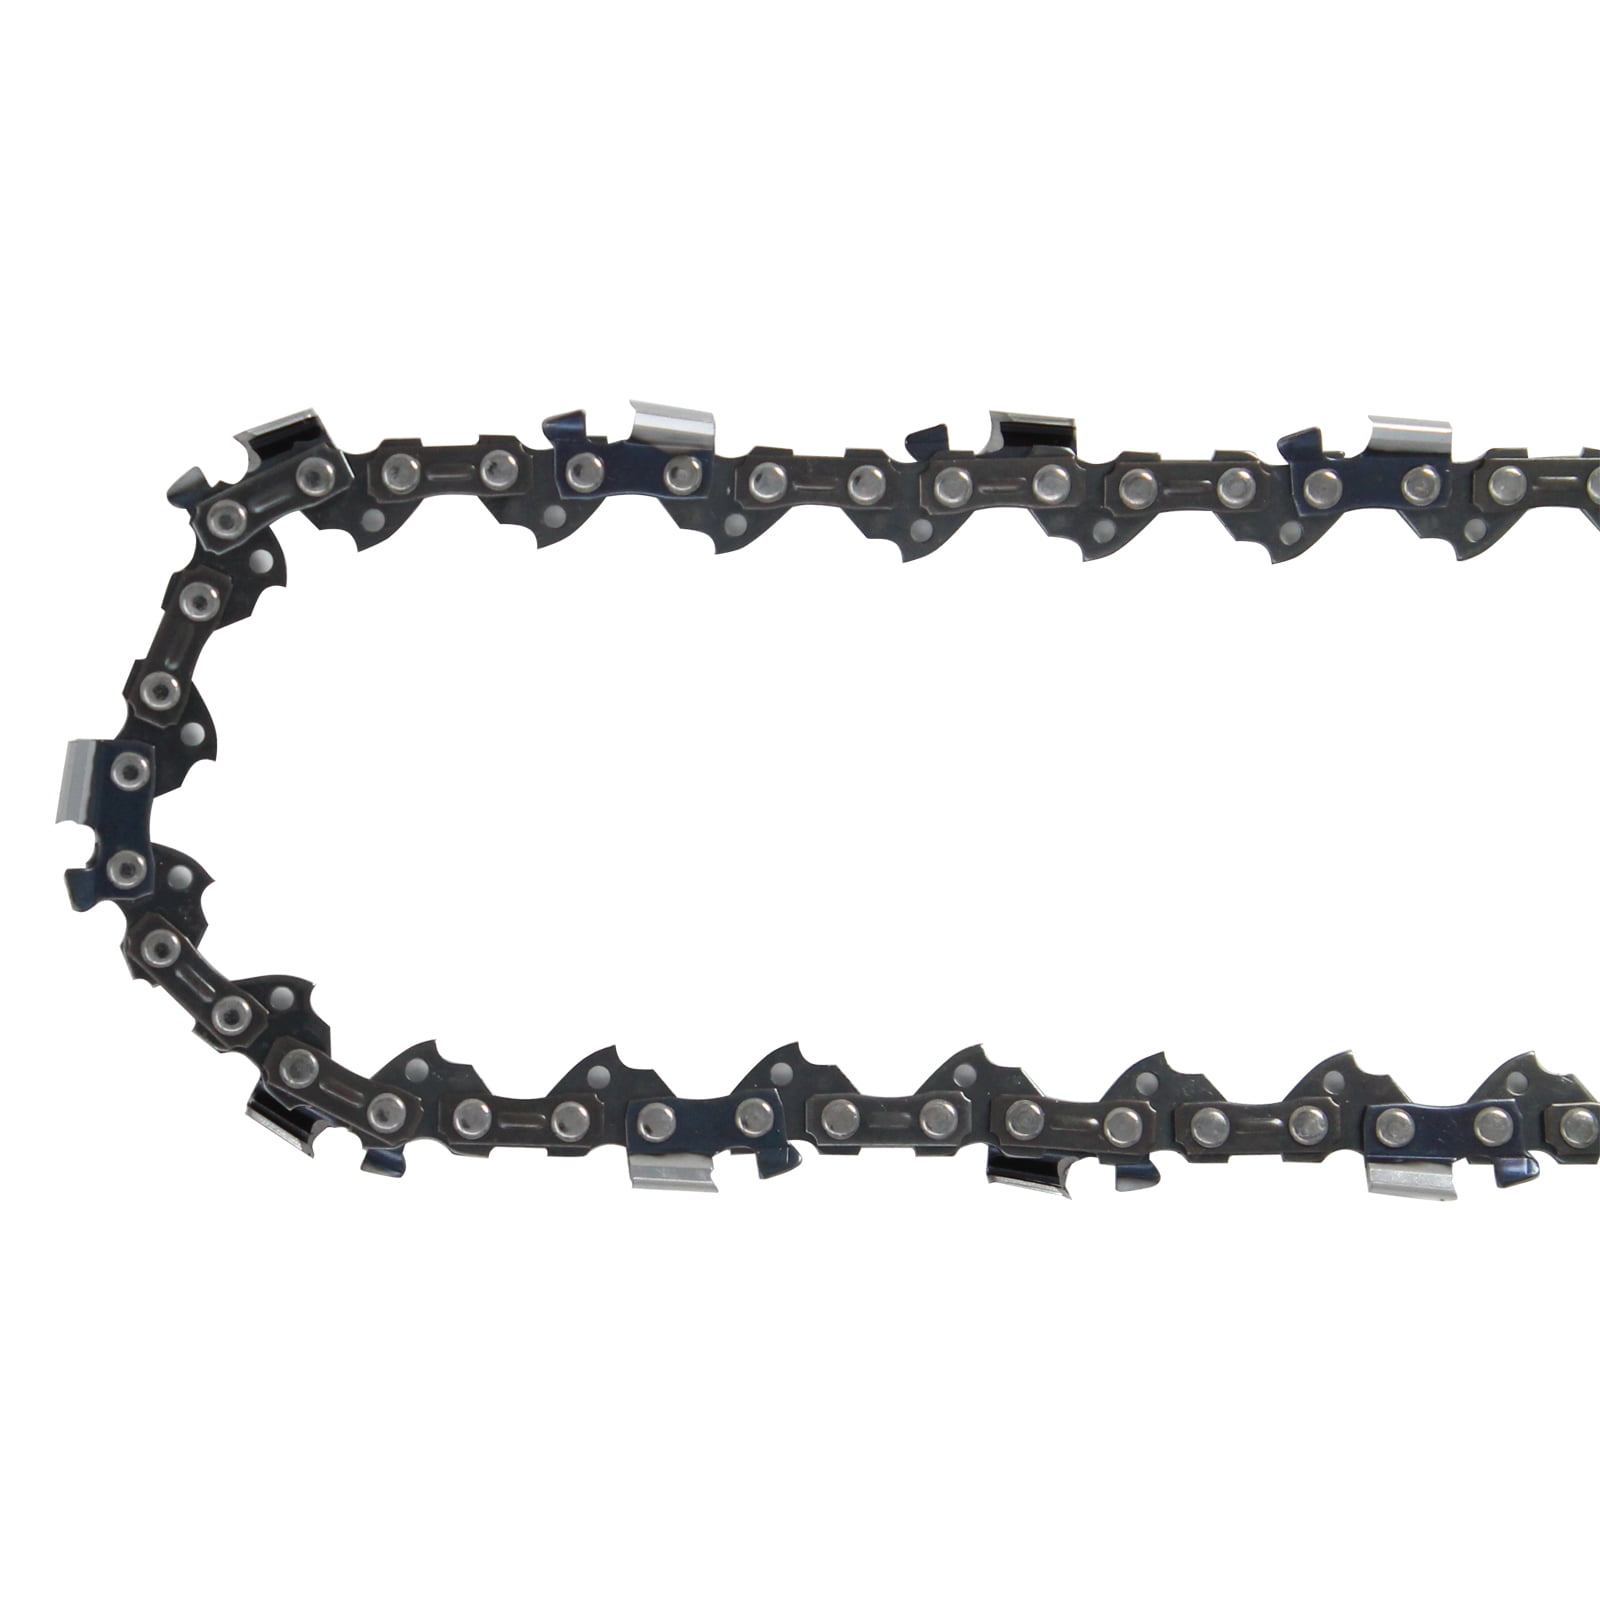 975W HECHT 955W 976W Part Chainsaw Chain for 8" Bar 